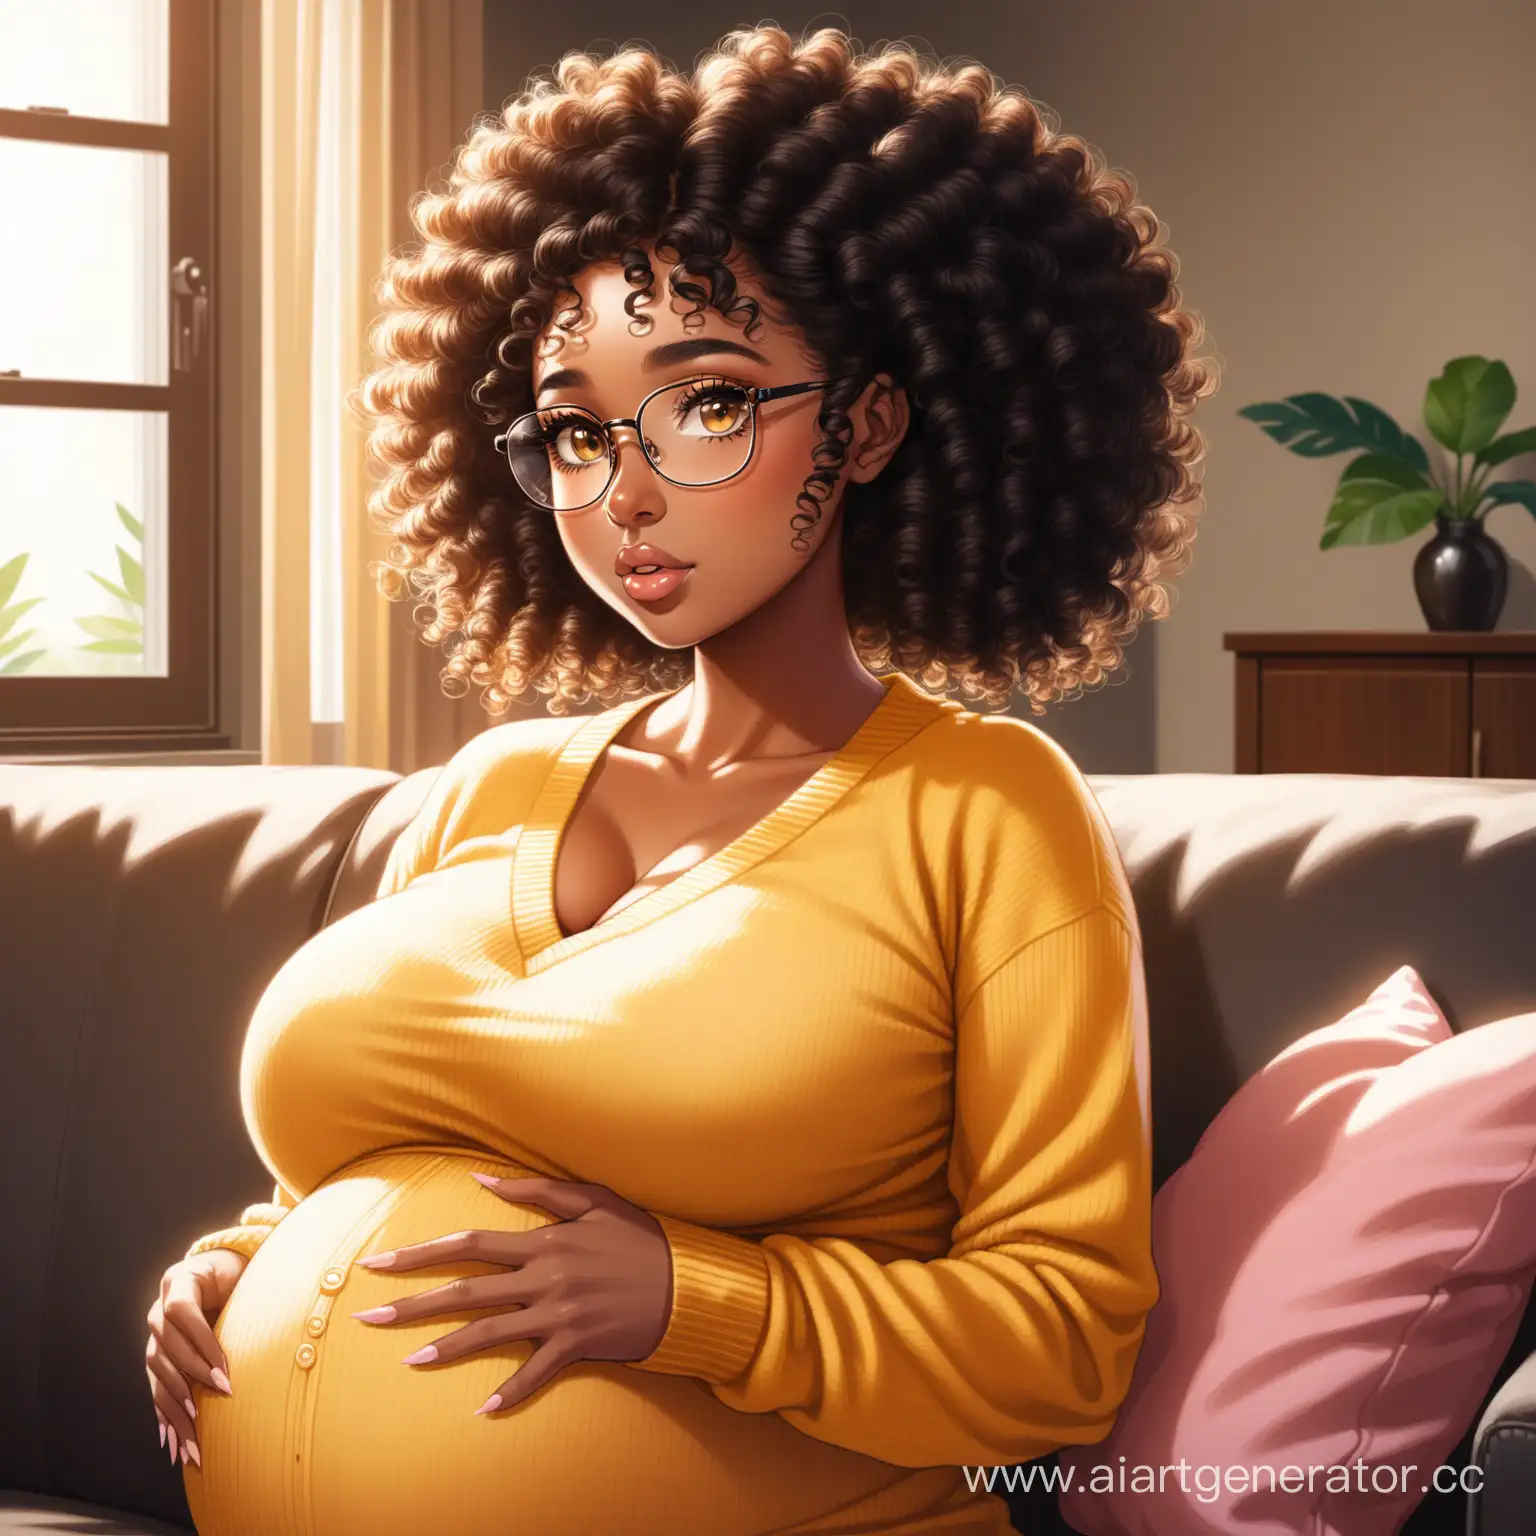 Girl, dark skin, brown eyes, big eyes, lush lips, big nose, lush eyelashes, afro curly hair, pigtails, big breasts, pregnant. Yellow sweater, black lassins, glasses. Sitting on the sofa, in the living room, day, warm light from the window